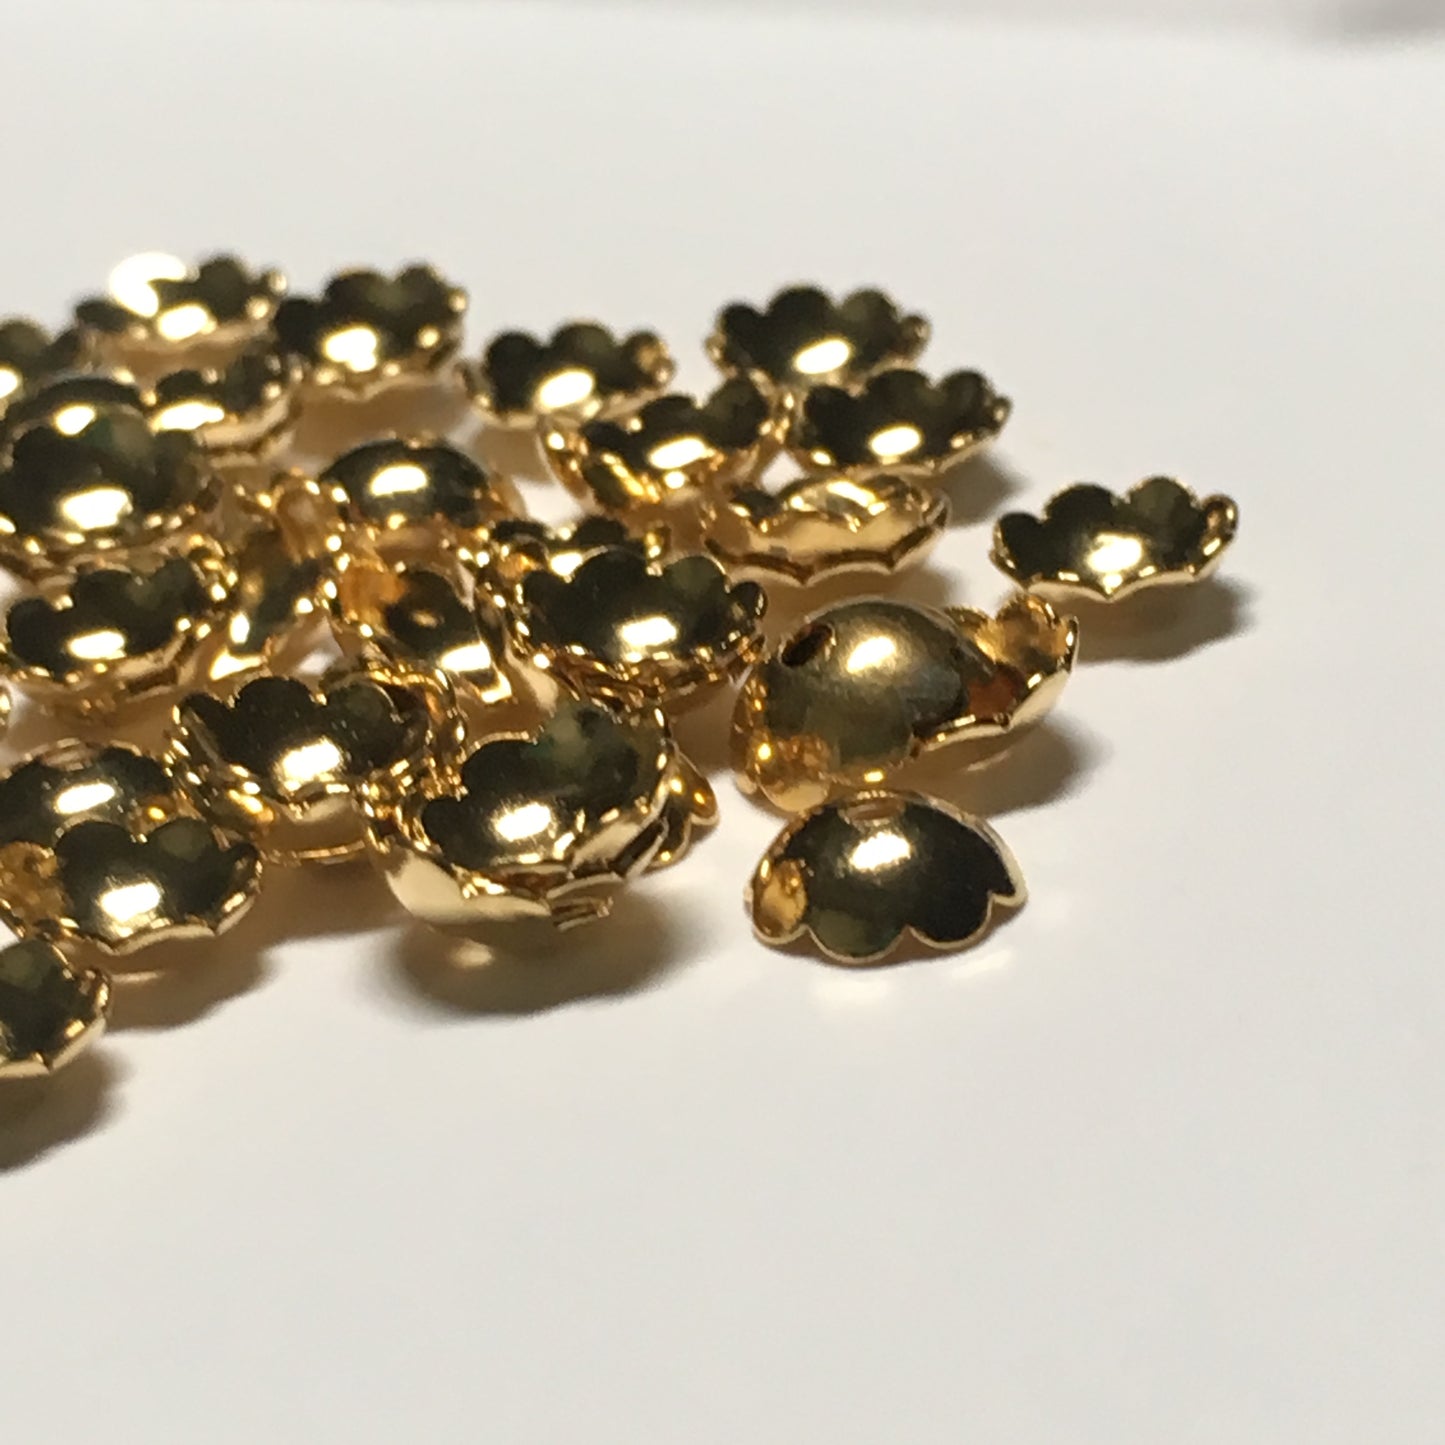 Gold Plated Solid Bead Caps, 6 mm  - 6 or 20 Caps